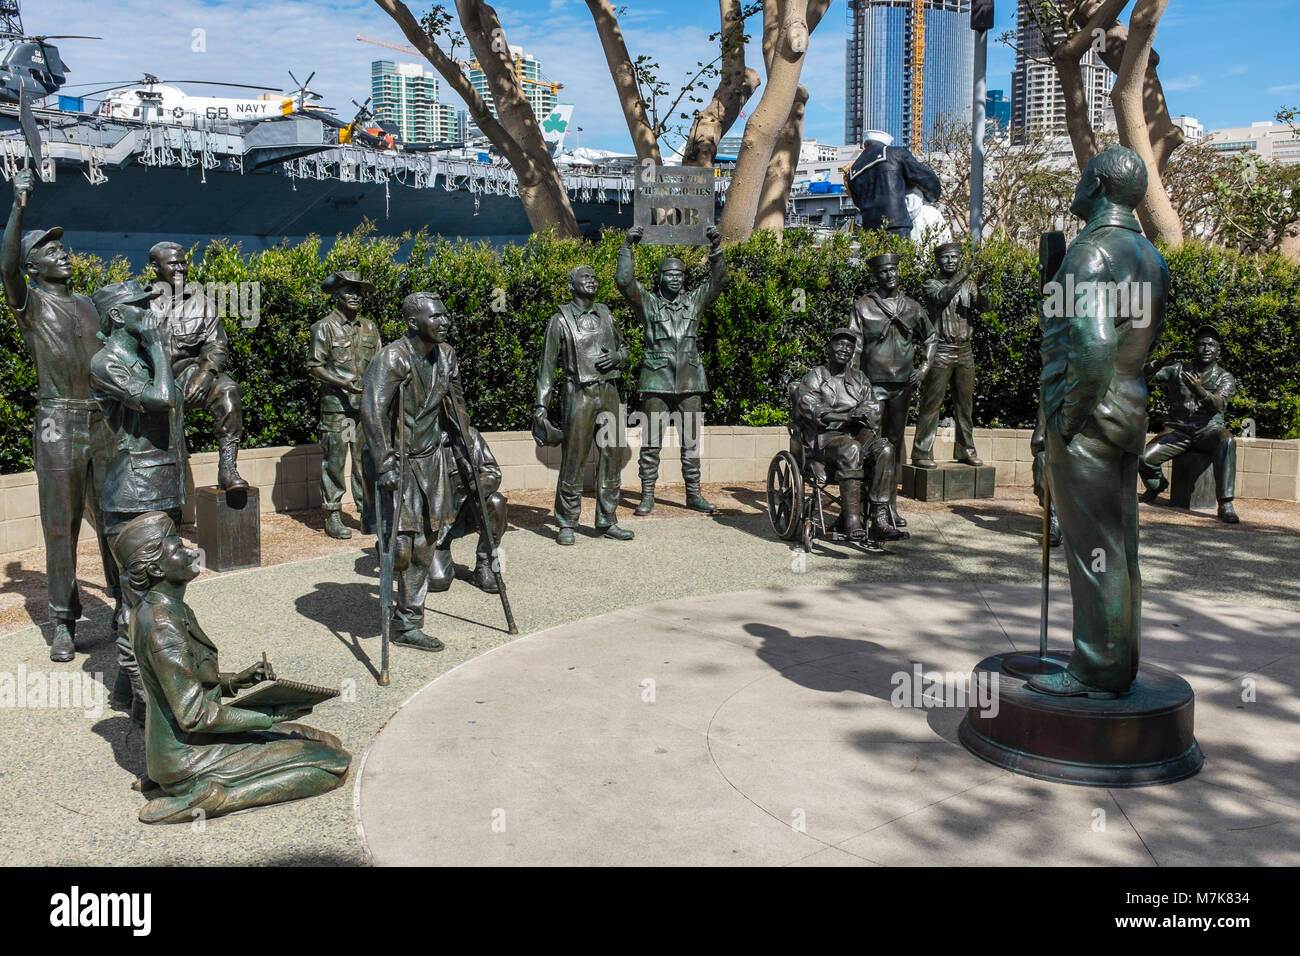 SAN DIEGO, CALIFORNIA, USA - National Statue to Bob Hope and the Military located on Harbor Drive in Downtown San Diego. Stock Photo